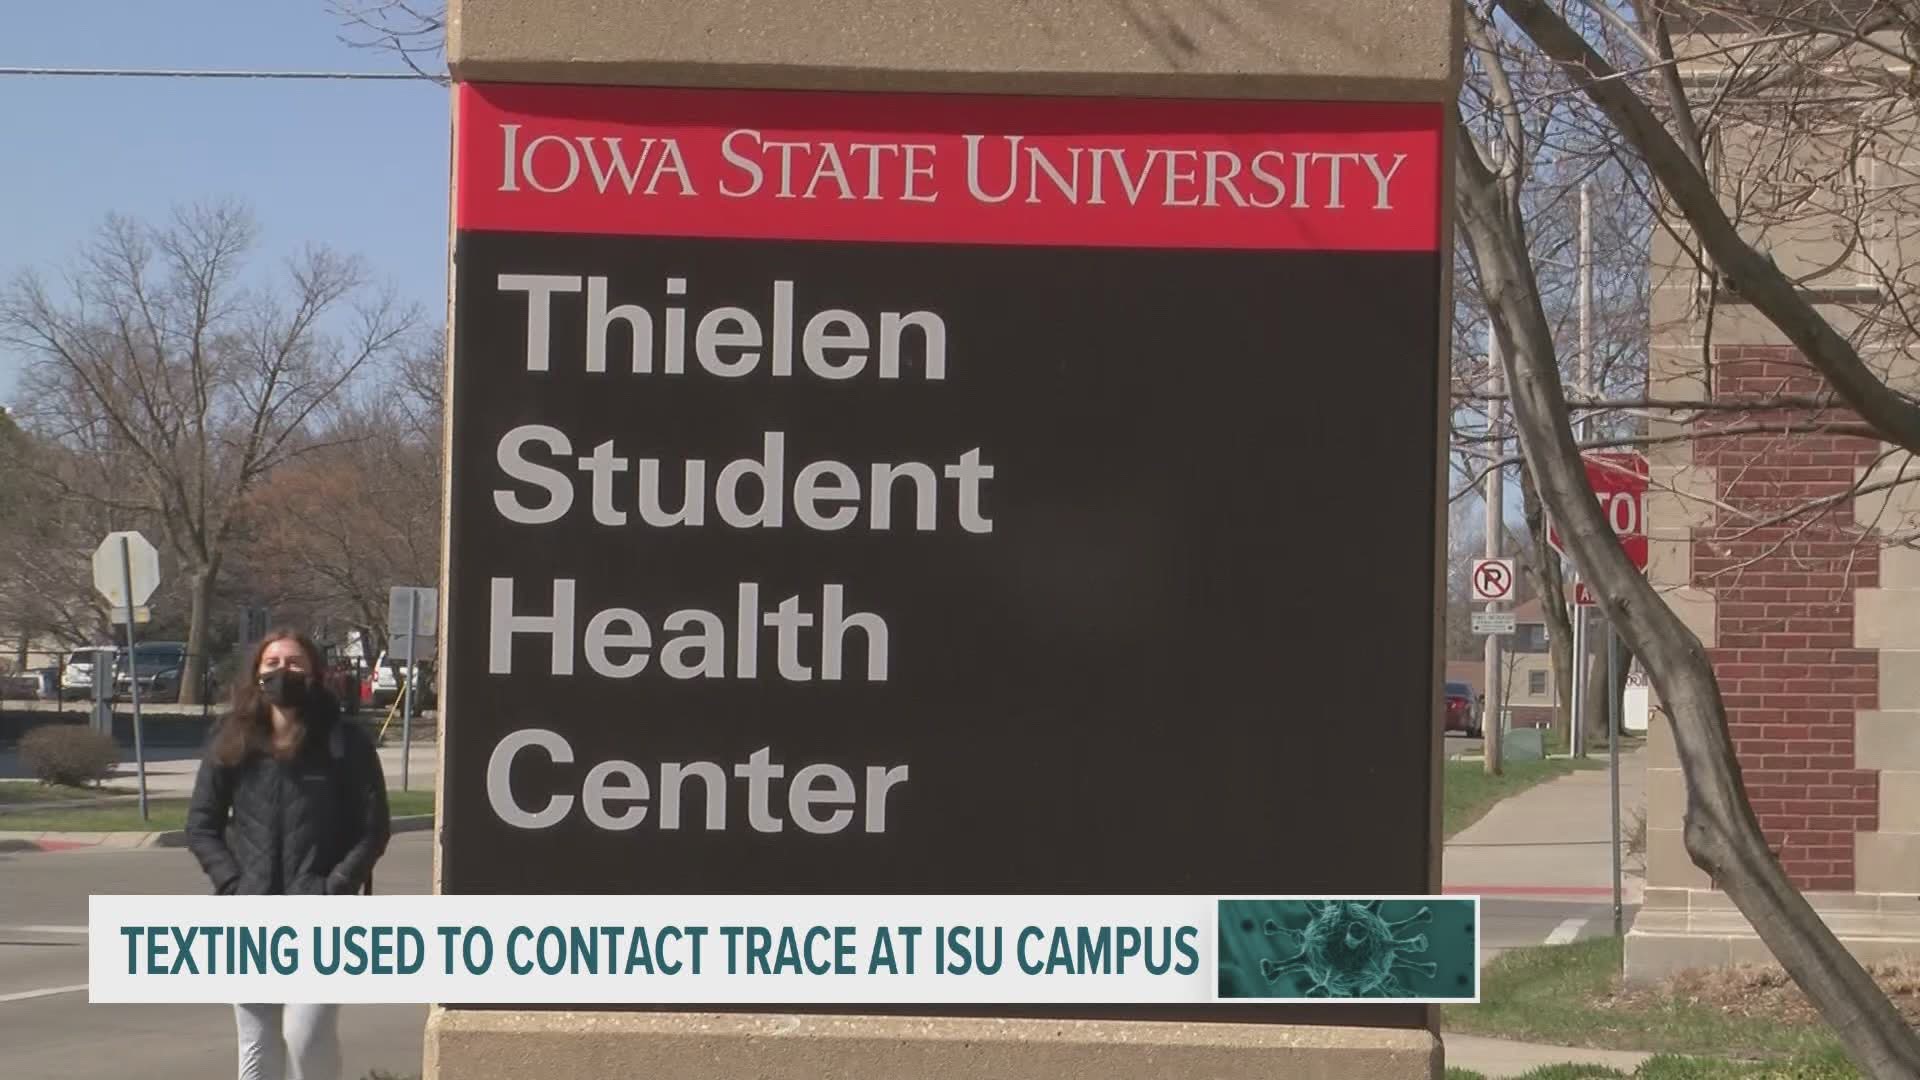 The health center stayed open, while many parts of the campus were closed, proving staff could handle treating patients with other illnesses during the pandemic.